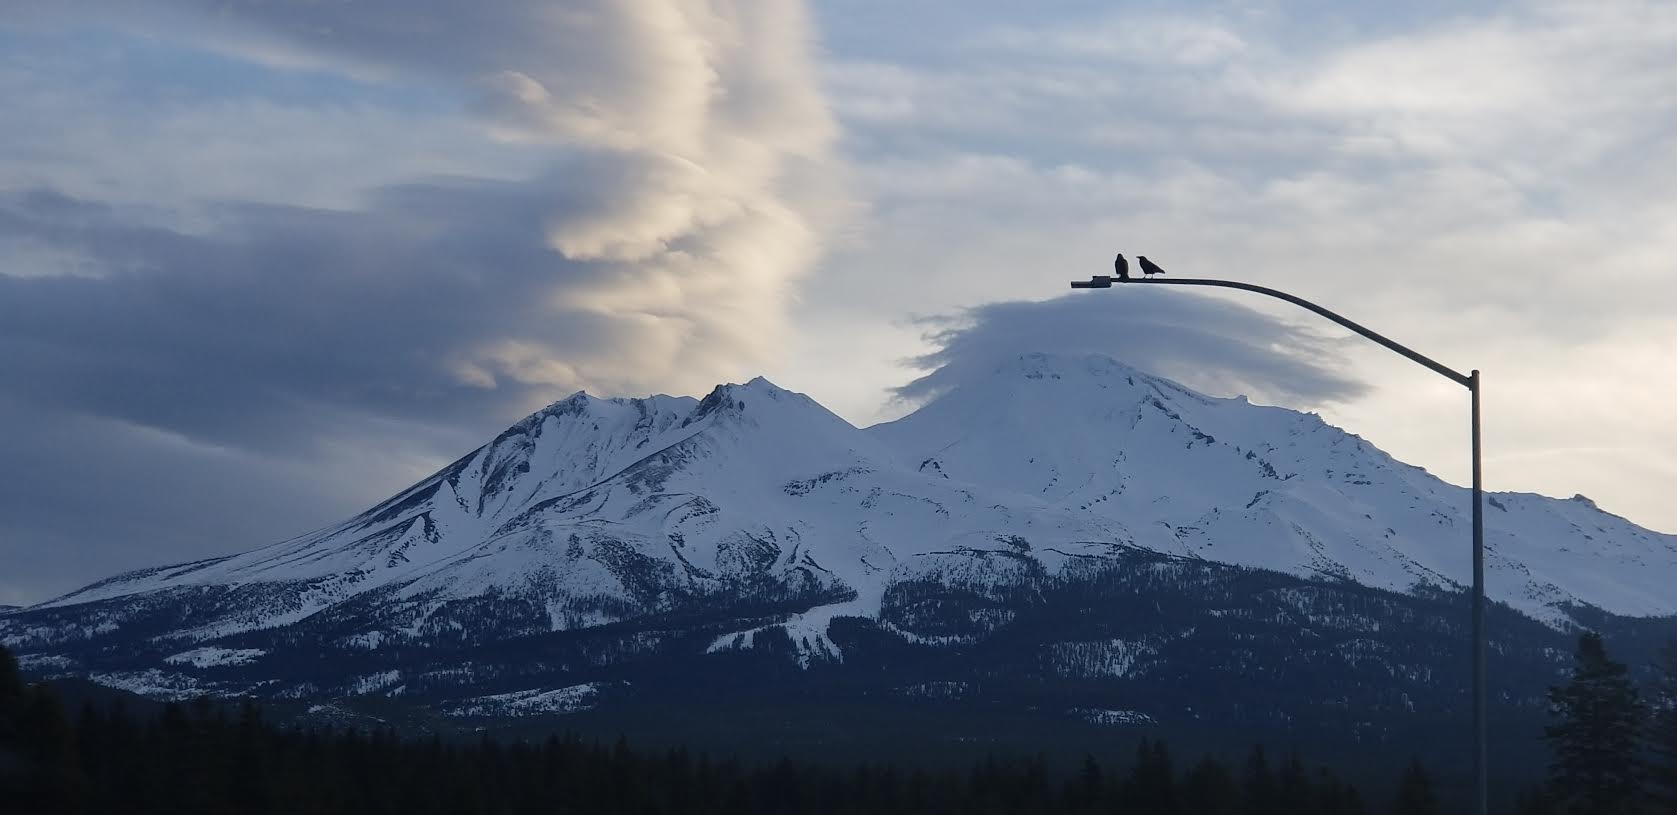 Birds enjoy the view over Mt. Shasta and a lenticular cloud in February of 2018.